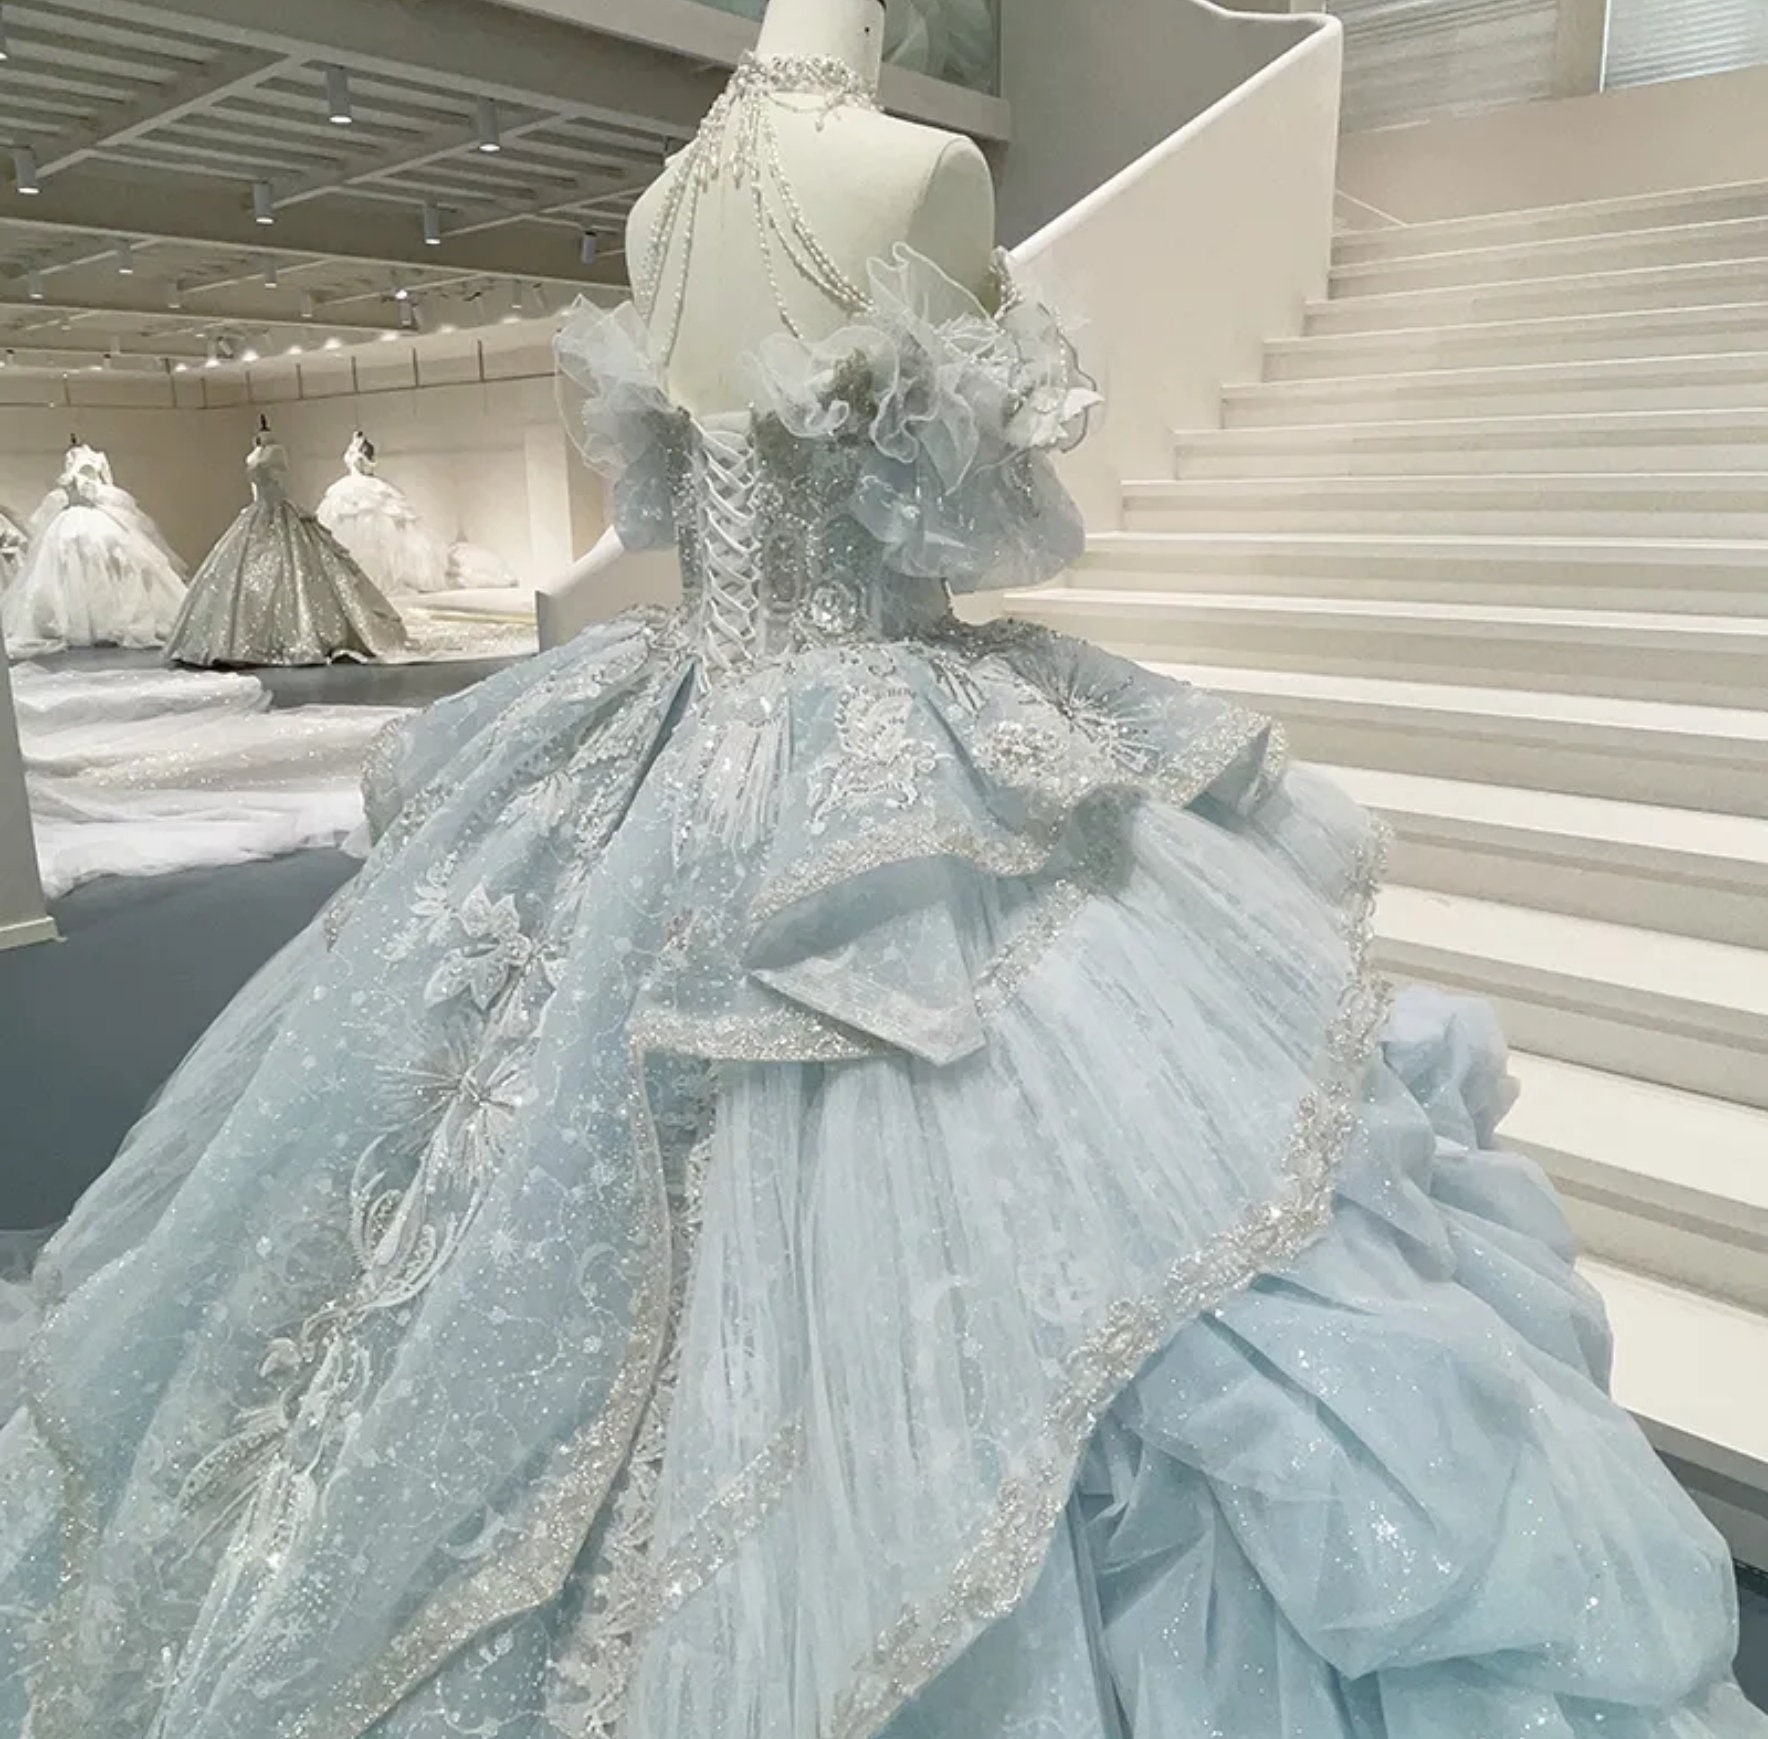 First Look: The Making of Cinderella's Wedding Gown | Vanity Fair